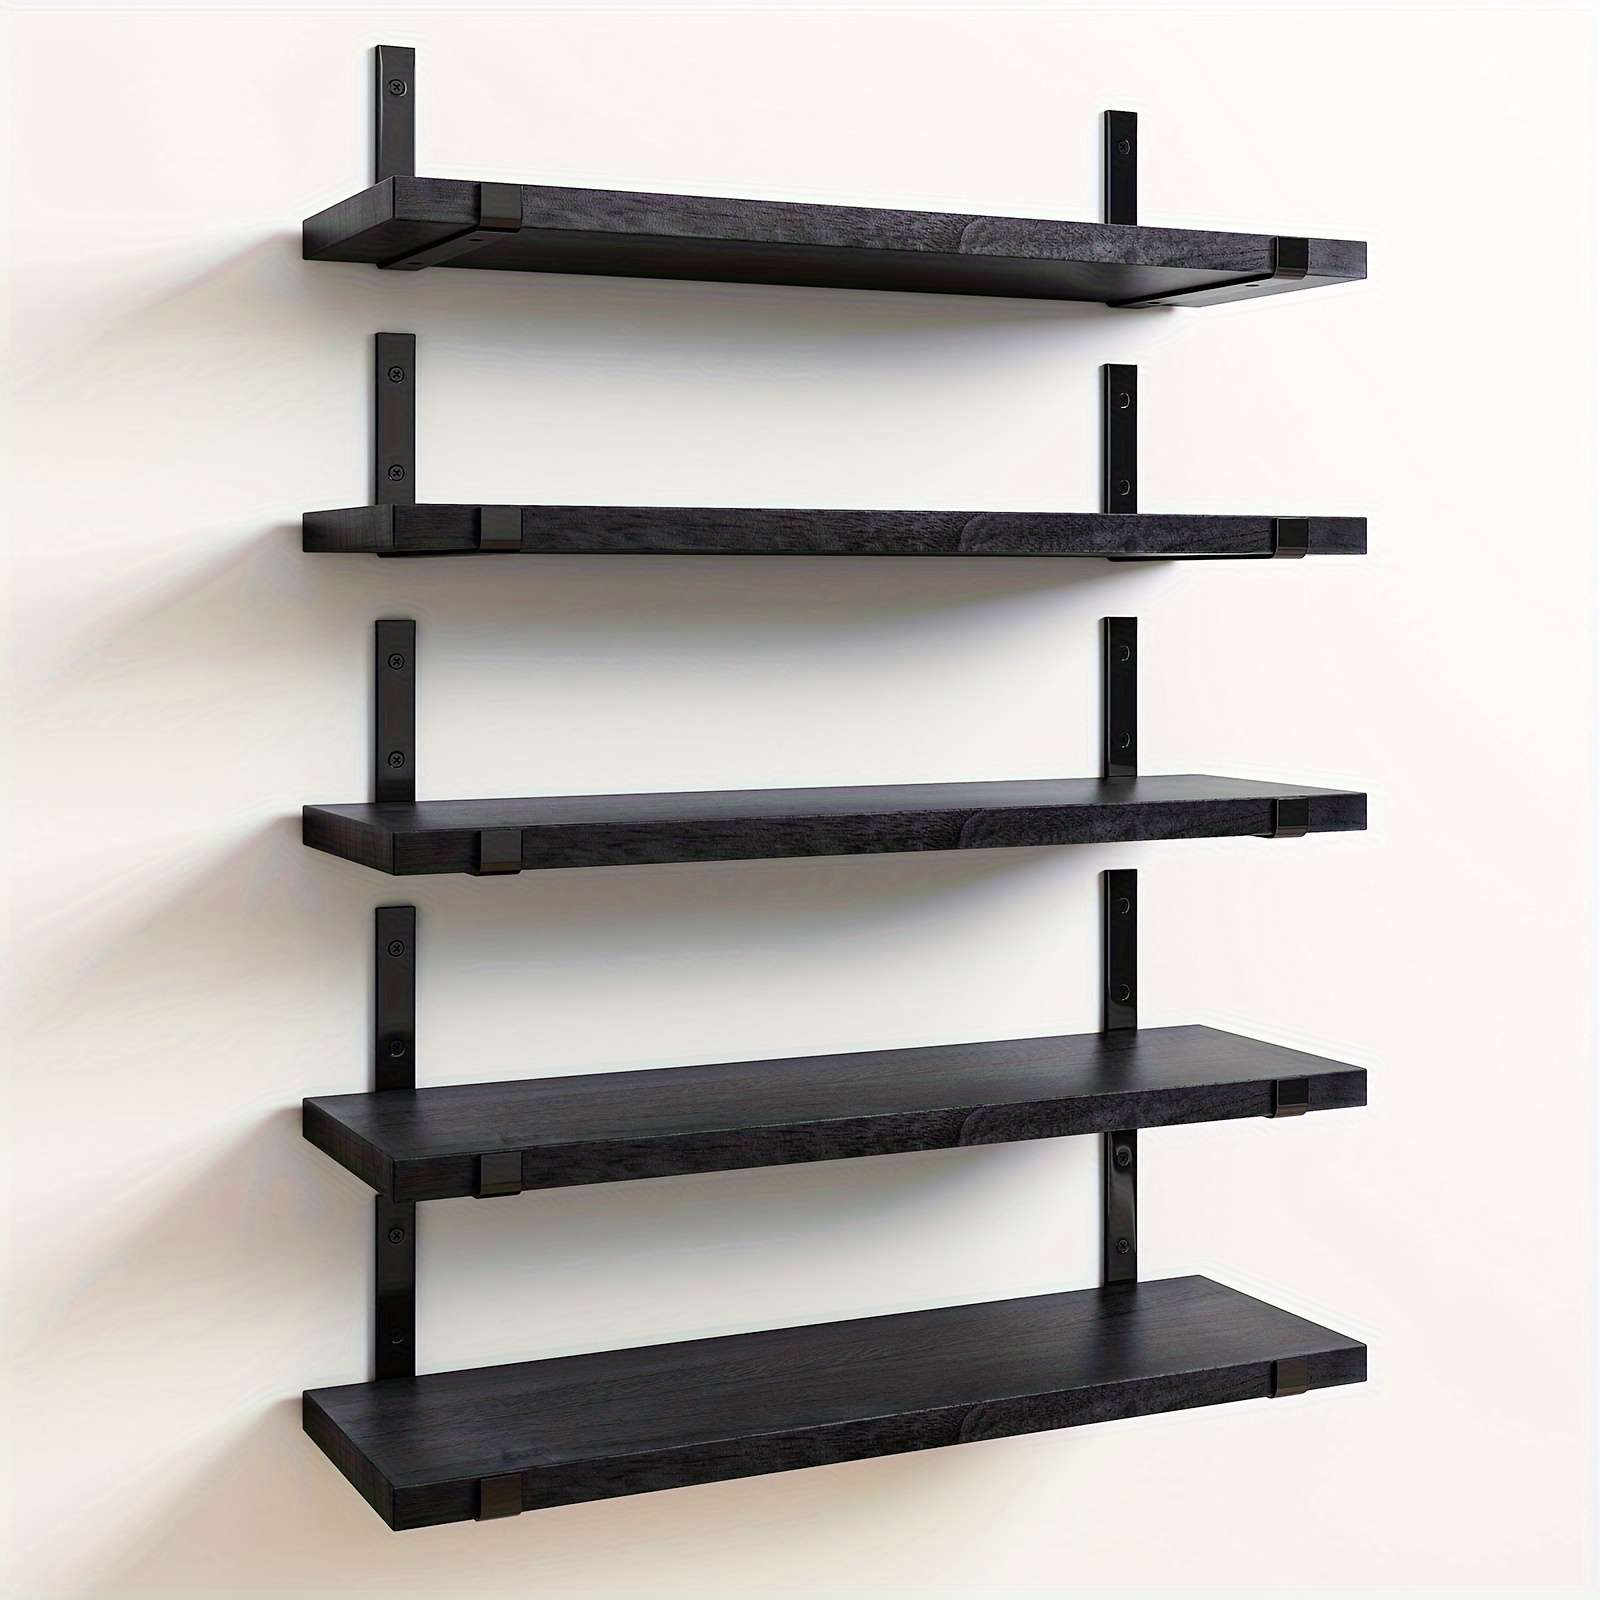 

Floating Shelves Set Of 5, 15.8x4.7 Inches Wall Shelves, Rustic Wall Storage Shelves For Bedroom, Living Room, Kitchen, Bathroom, Home Decor, Laundry Room, Office And Plants (black)